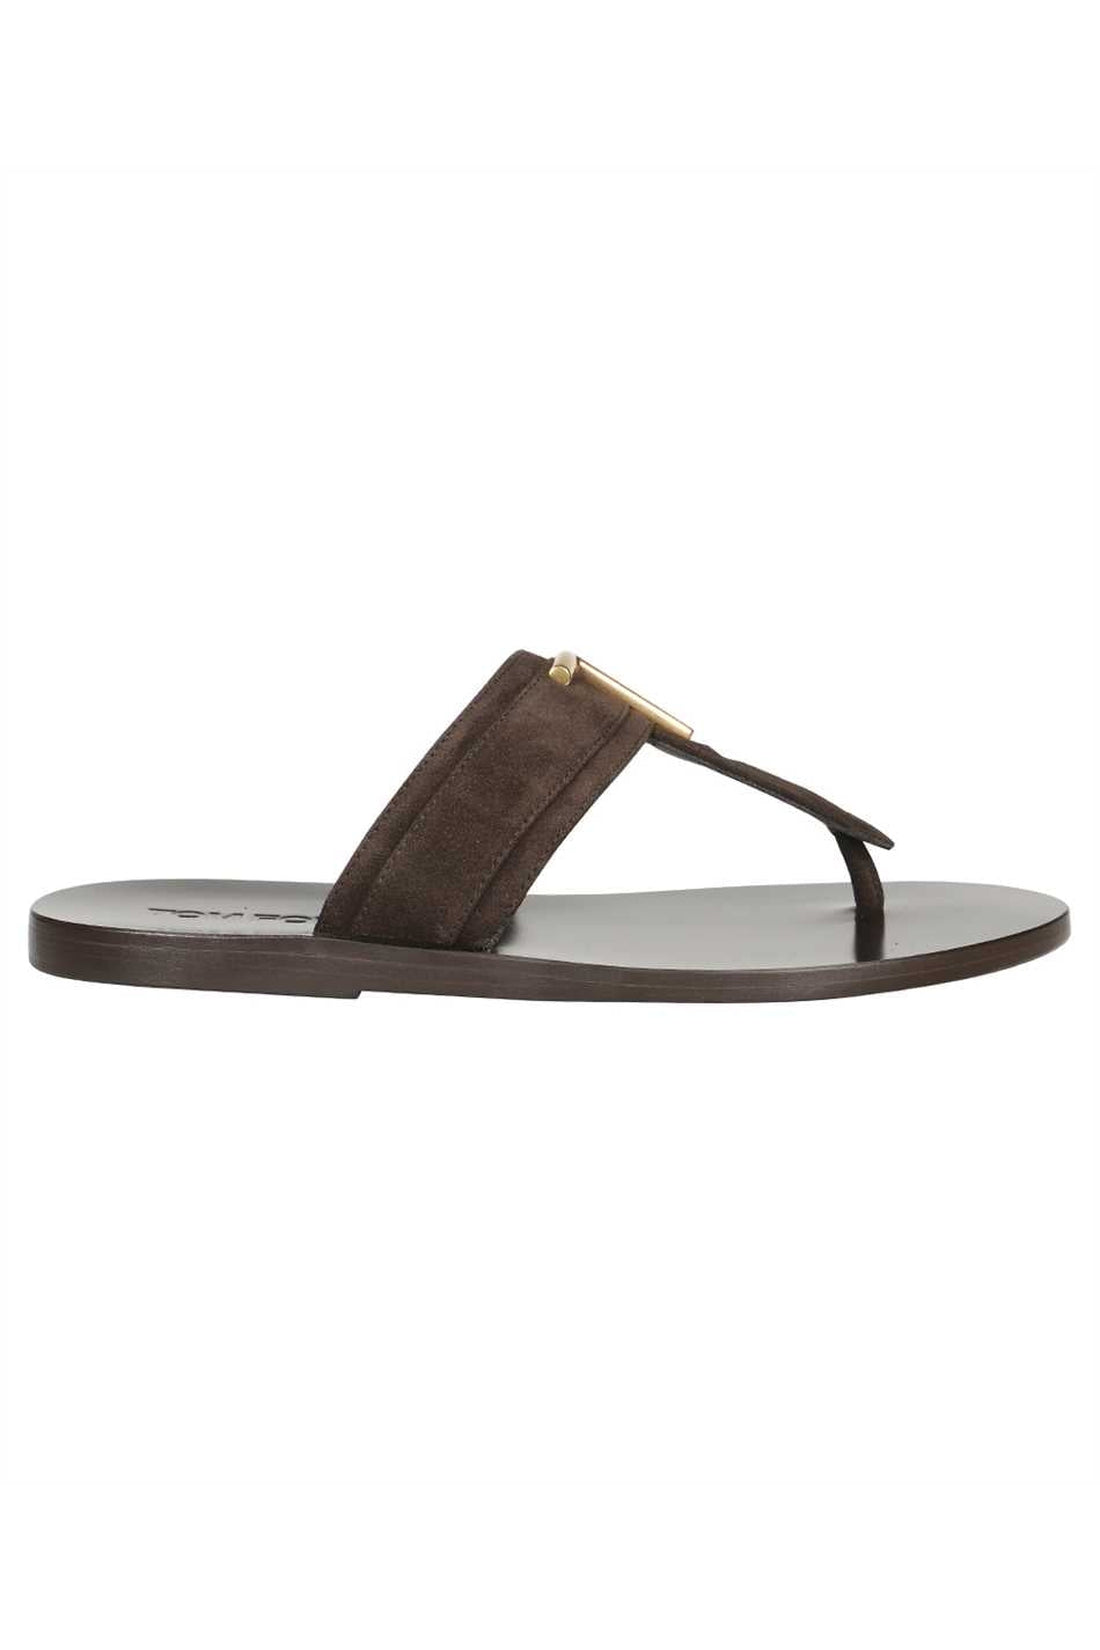 Tom Ford-OUTLET-SALE-Brighton suede thong-sandals-ARCHIVIST